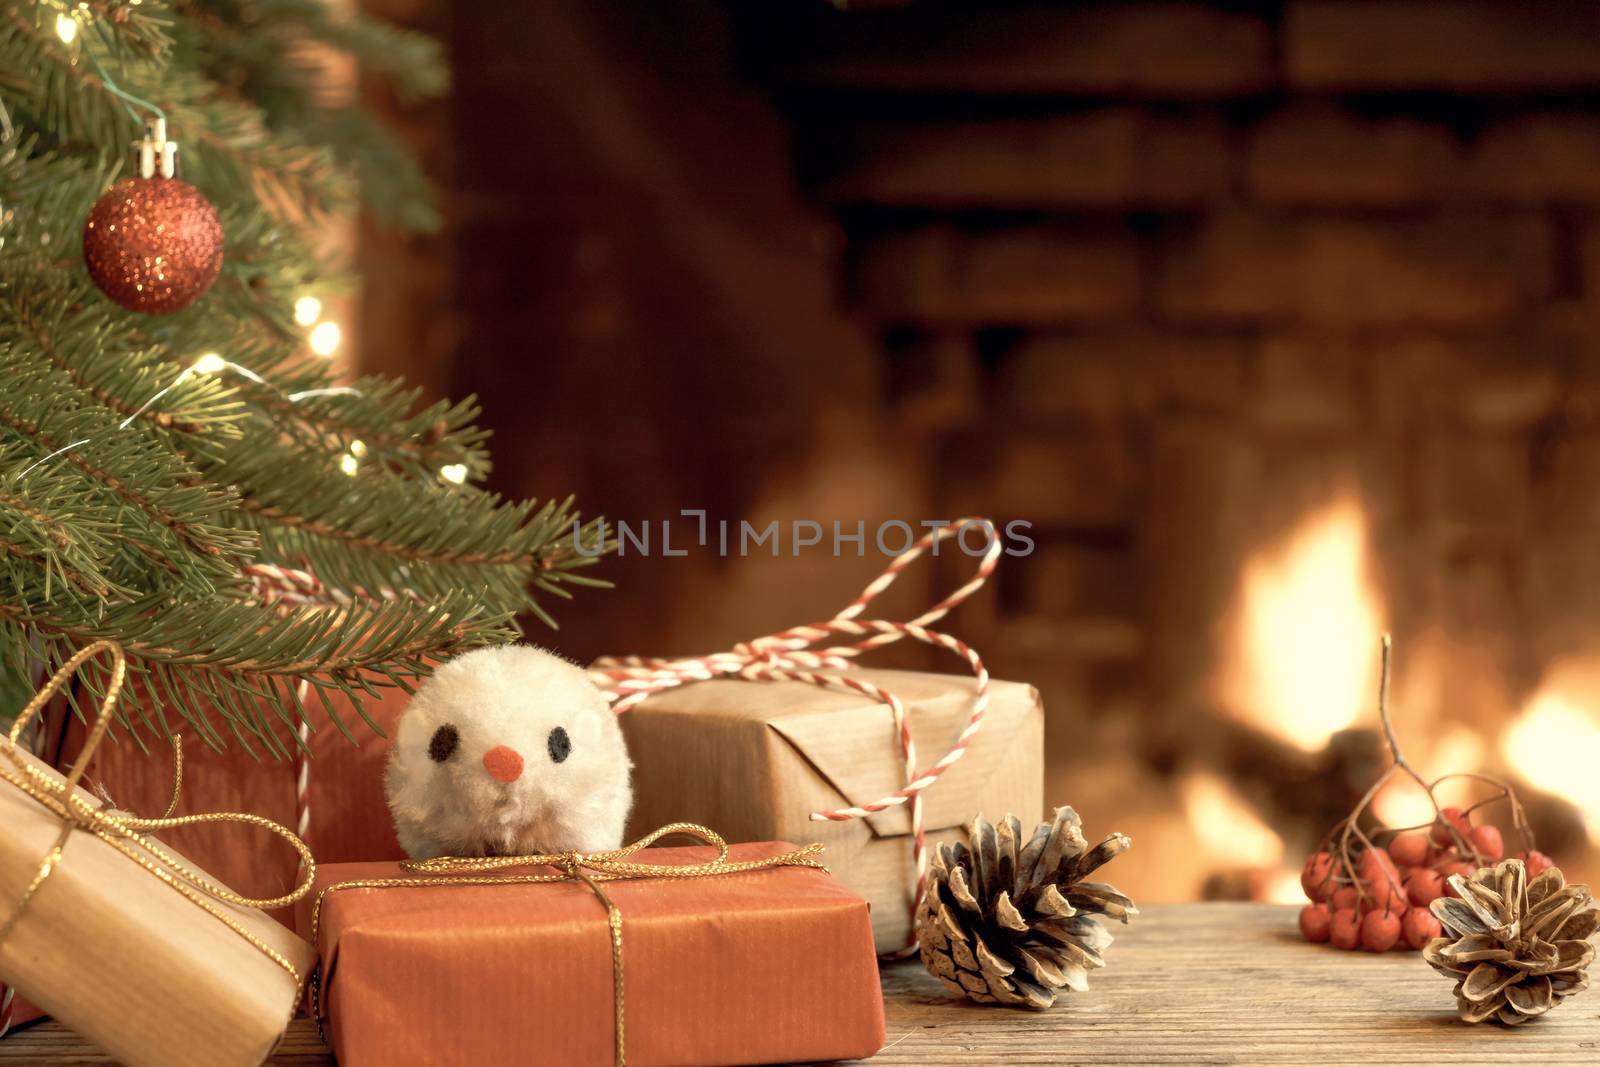 Christmas composition - mouse is symbol of 2020 according to Chinese horoscope next to gifts under Christmas tree in room by fireplace by galsand